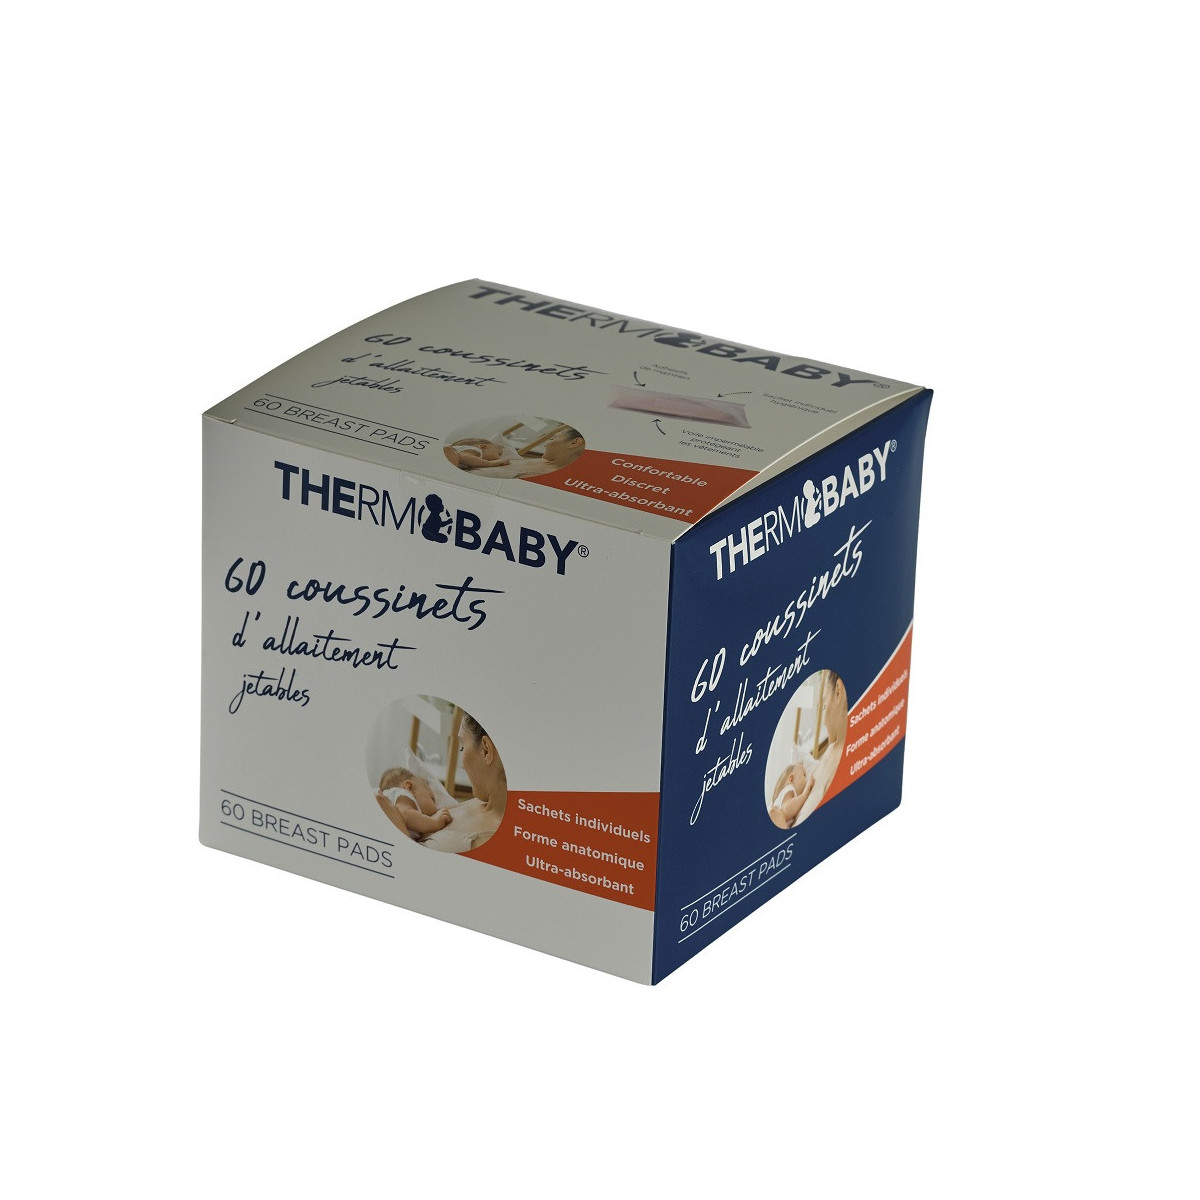 Coussinets d'Allaitement Jetables x40 Tommee Tippee - Bambinou